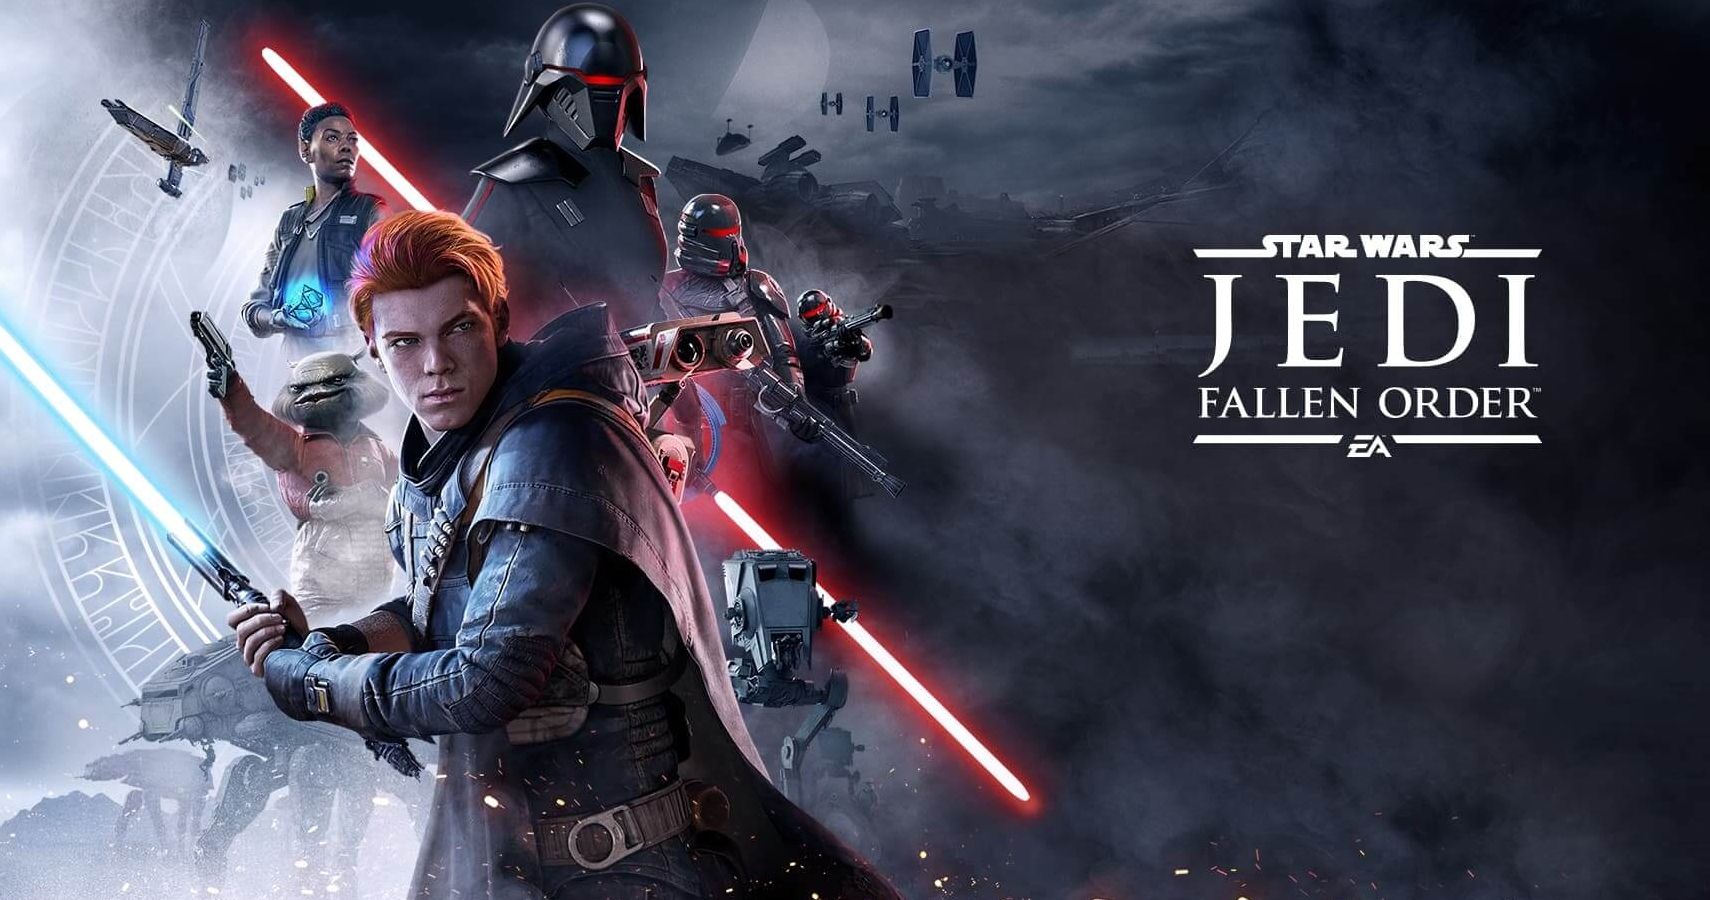 Star Wars Jedi Fallen Order Sets Record For Fastest Selling Digital Launch In Series History